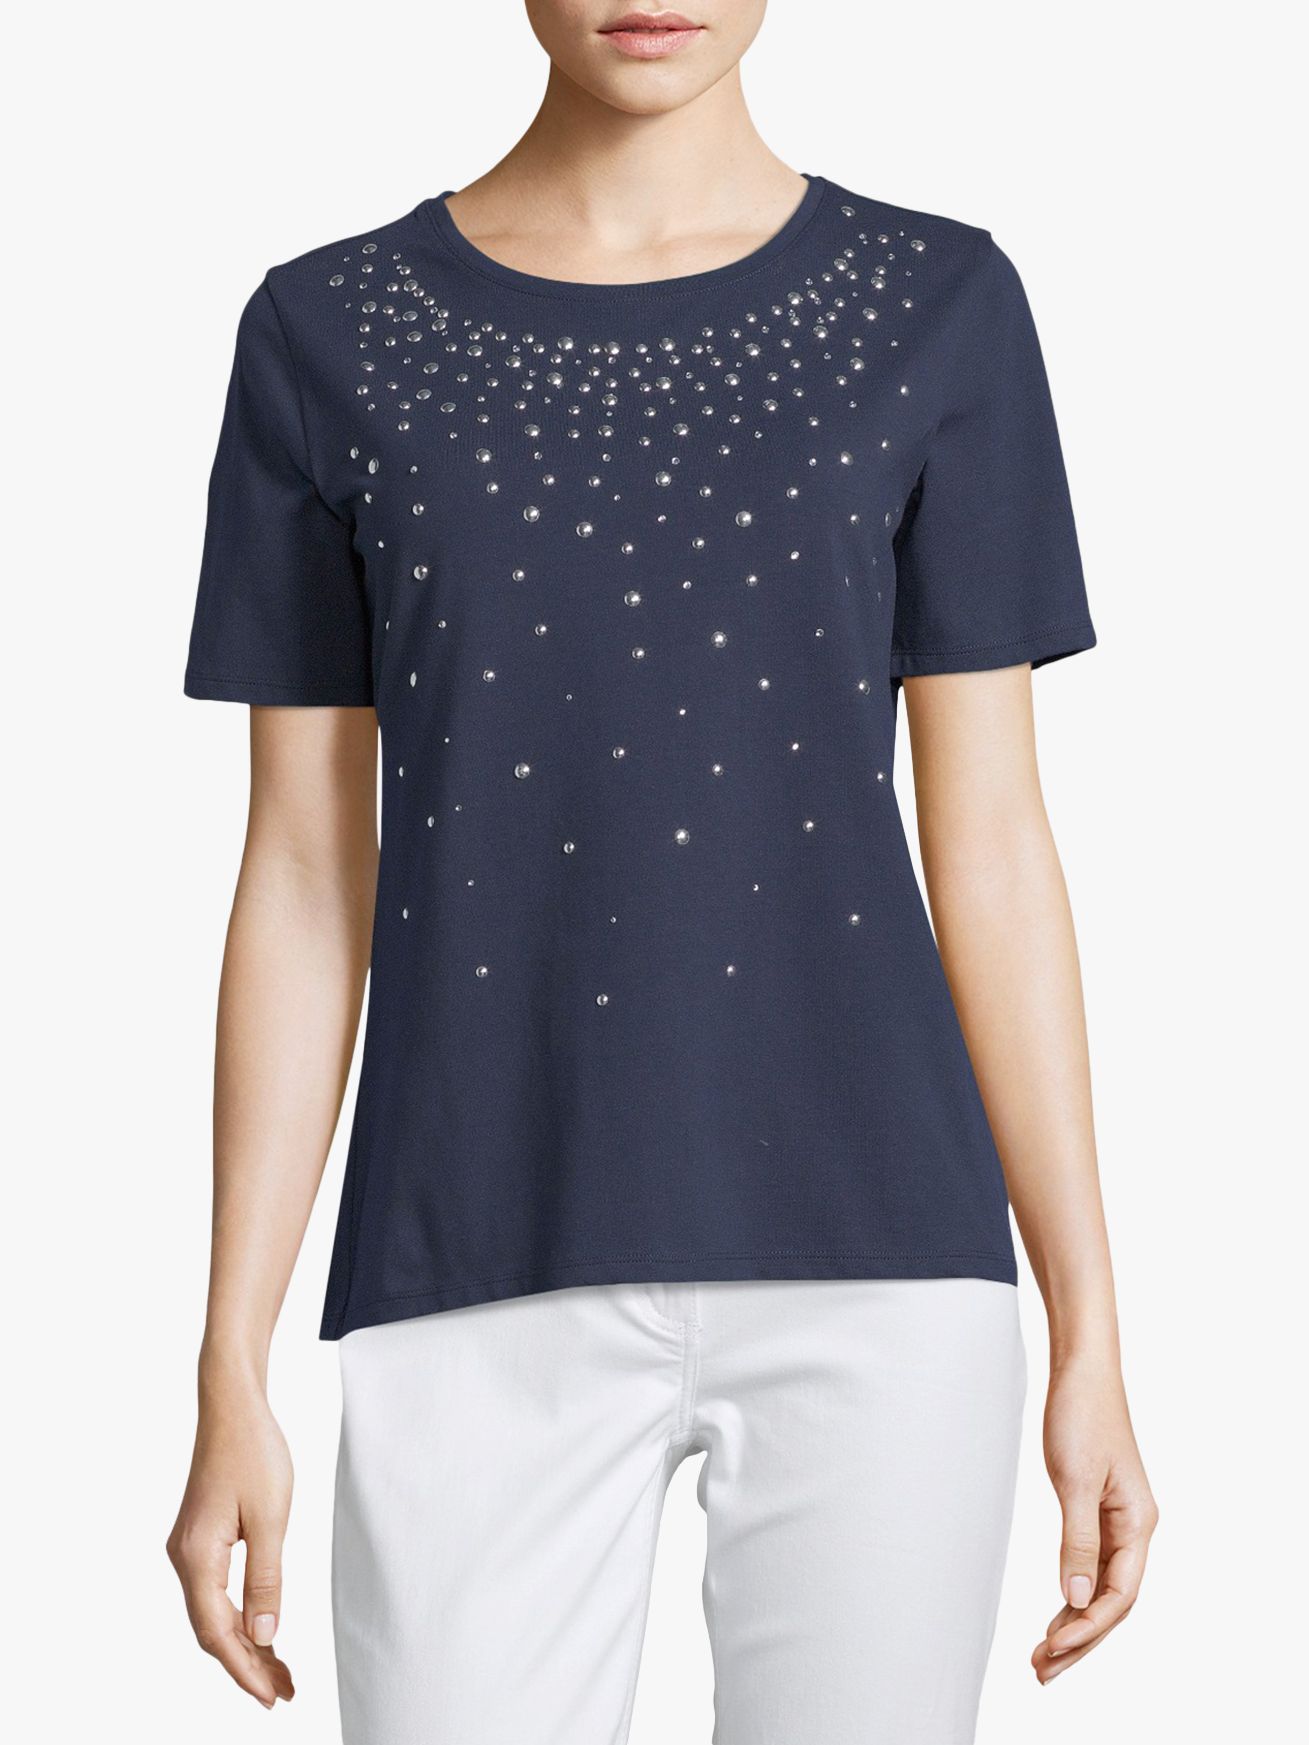 Betty Barclay Embellished Stud Top